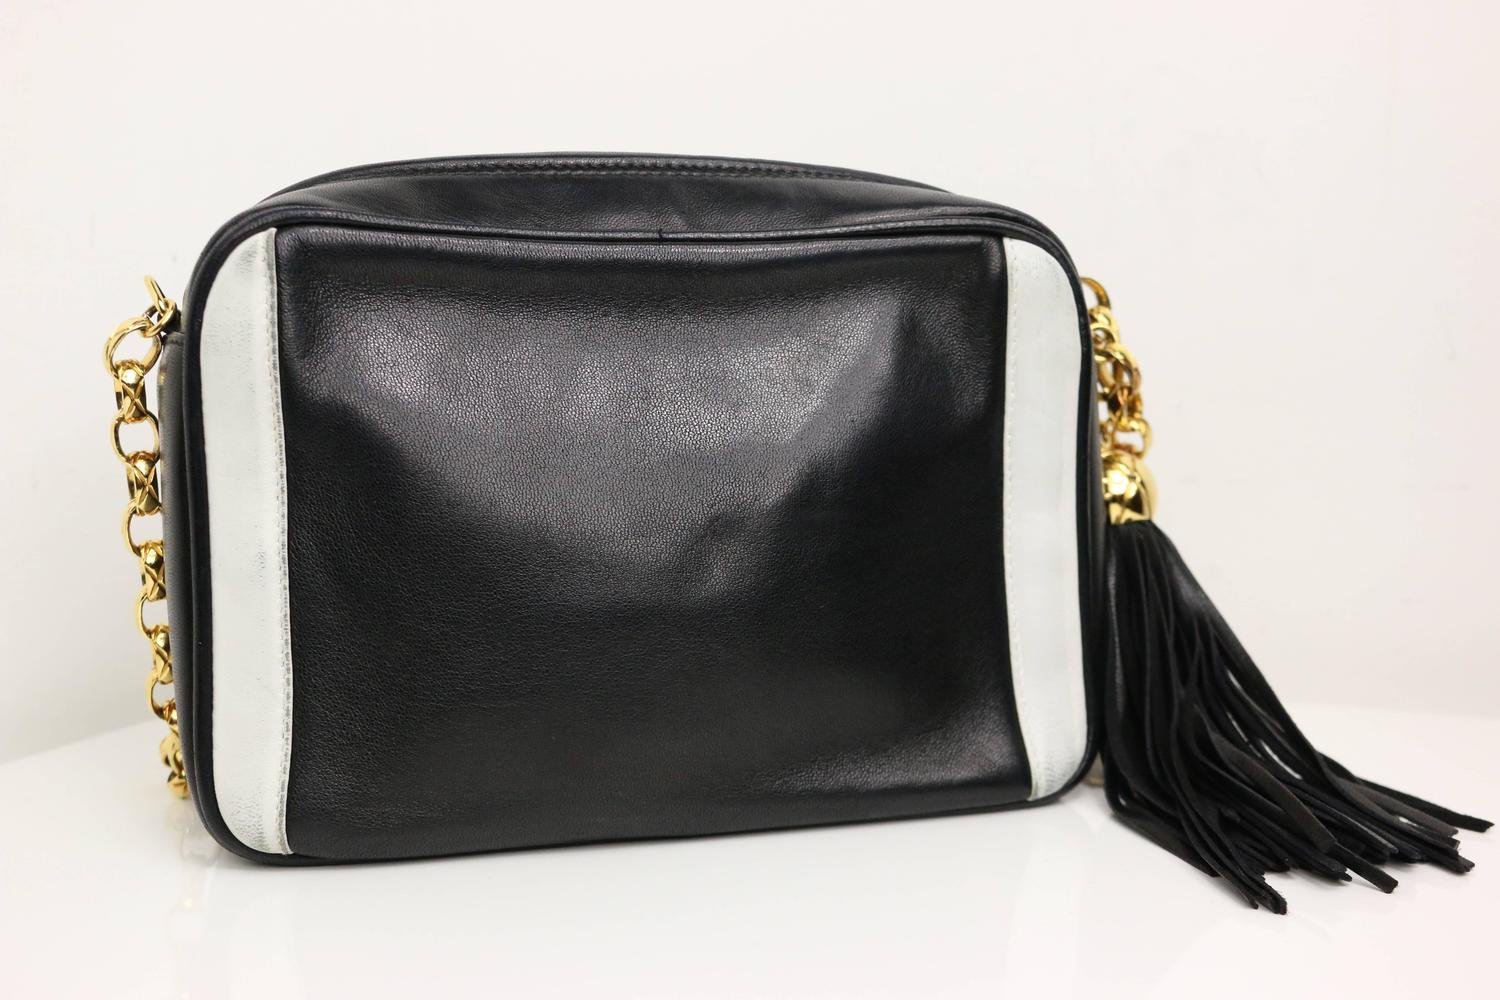 Chanel Black and White Lambskin &quot;CC&#39; Logo Gold Chain Strap Cross-Body Bag at 1stdibs